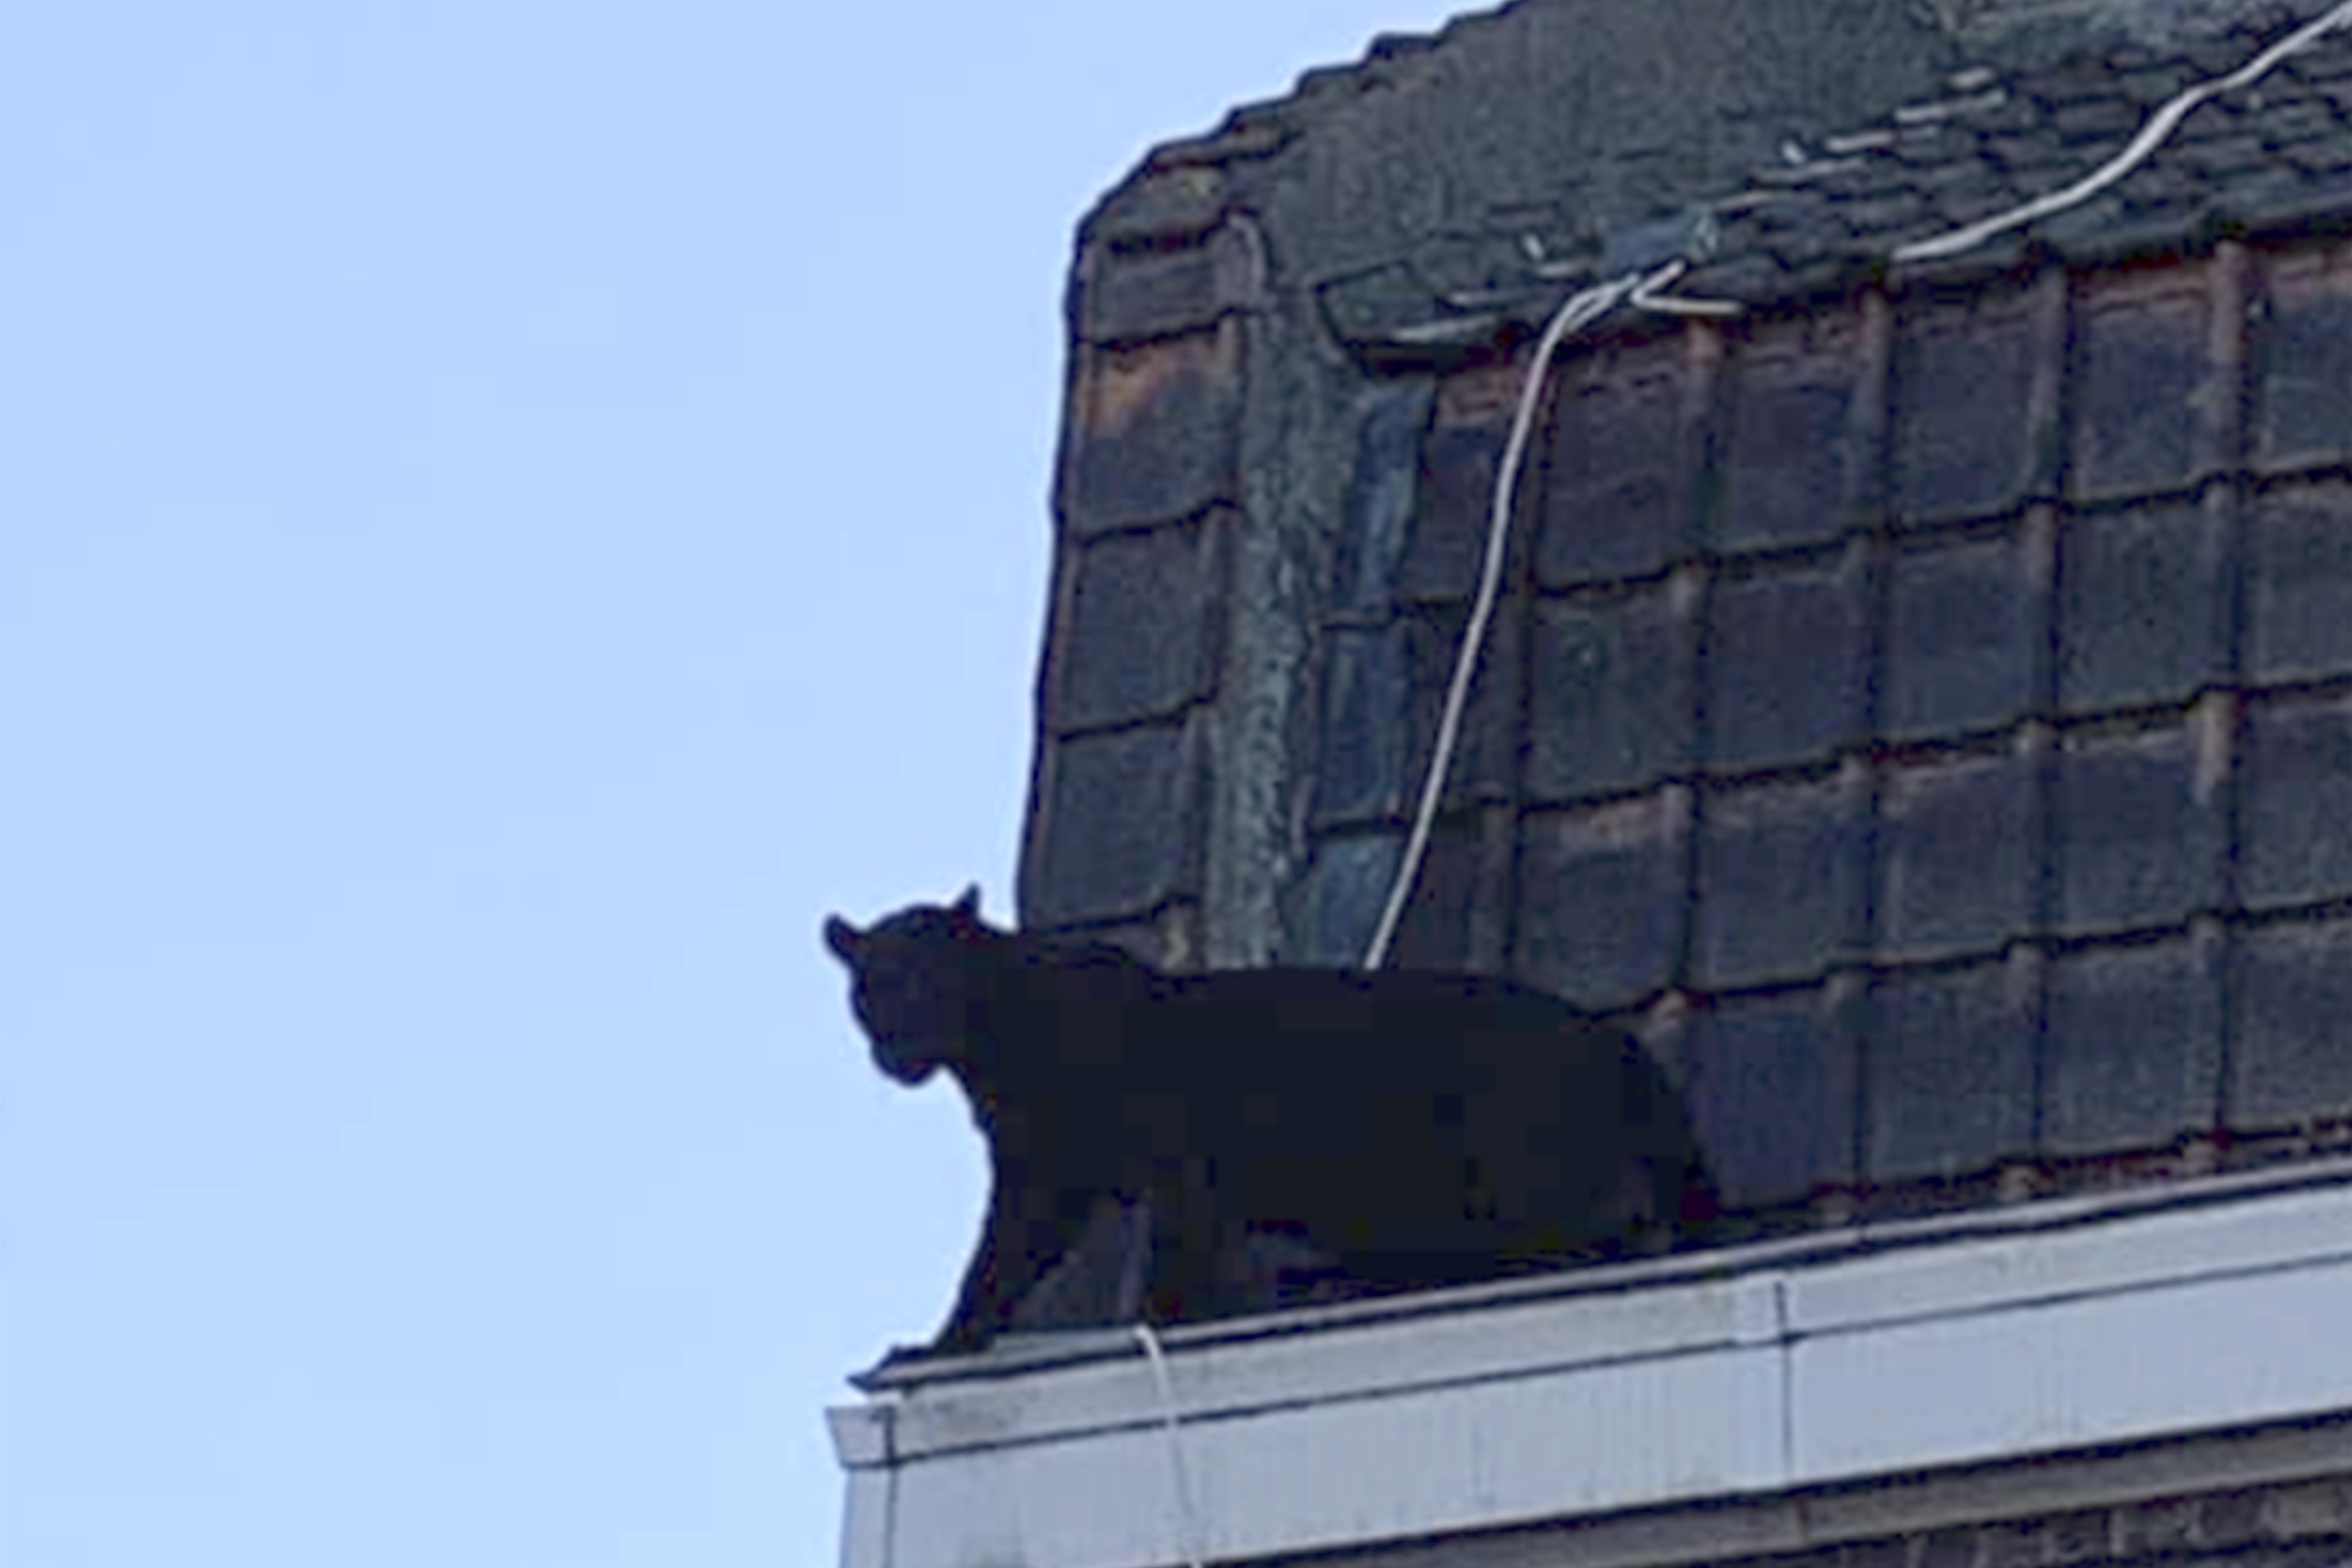 The panther stood at the edge of the roof